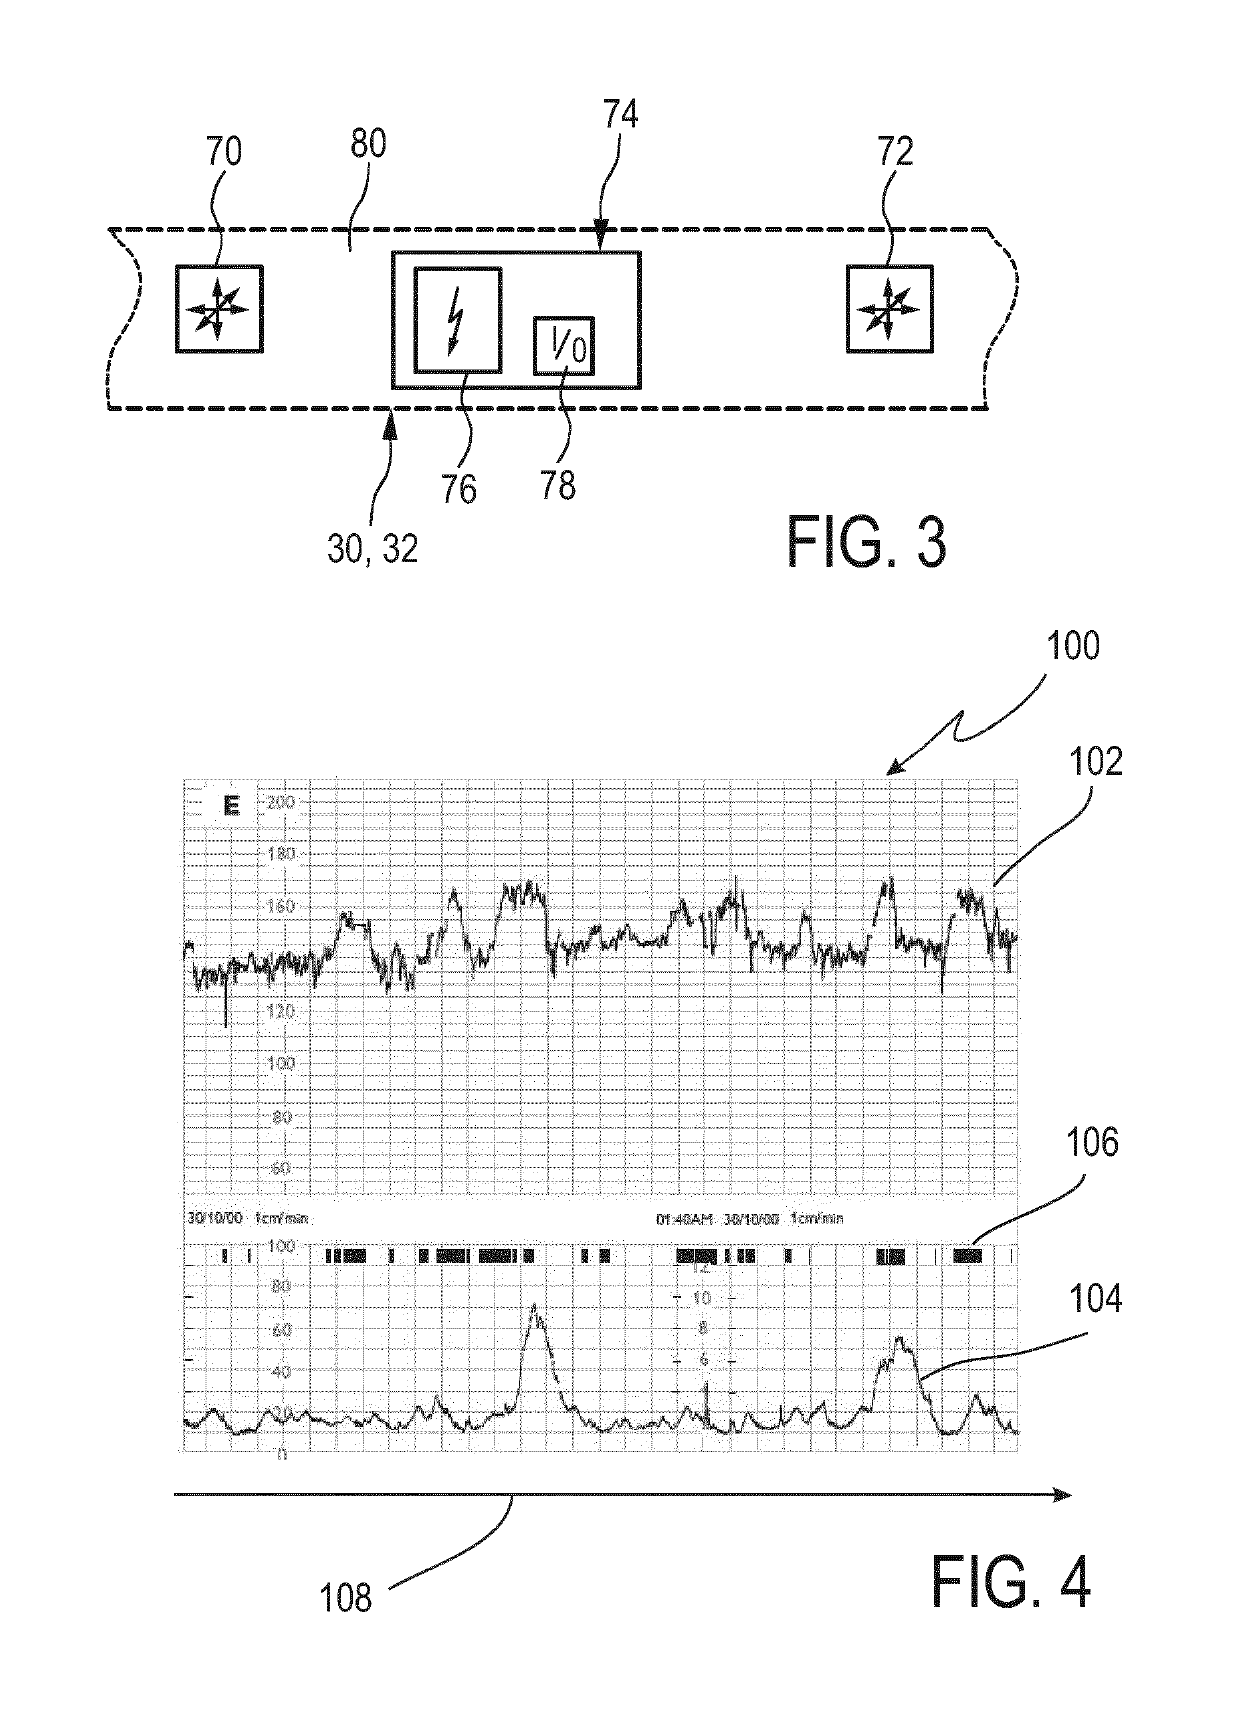 Pregnancy monitoring system and method